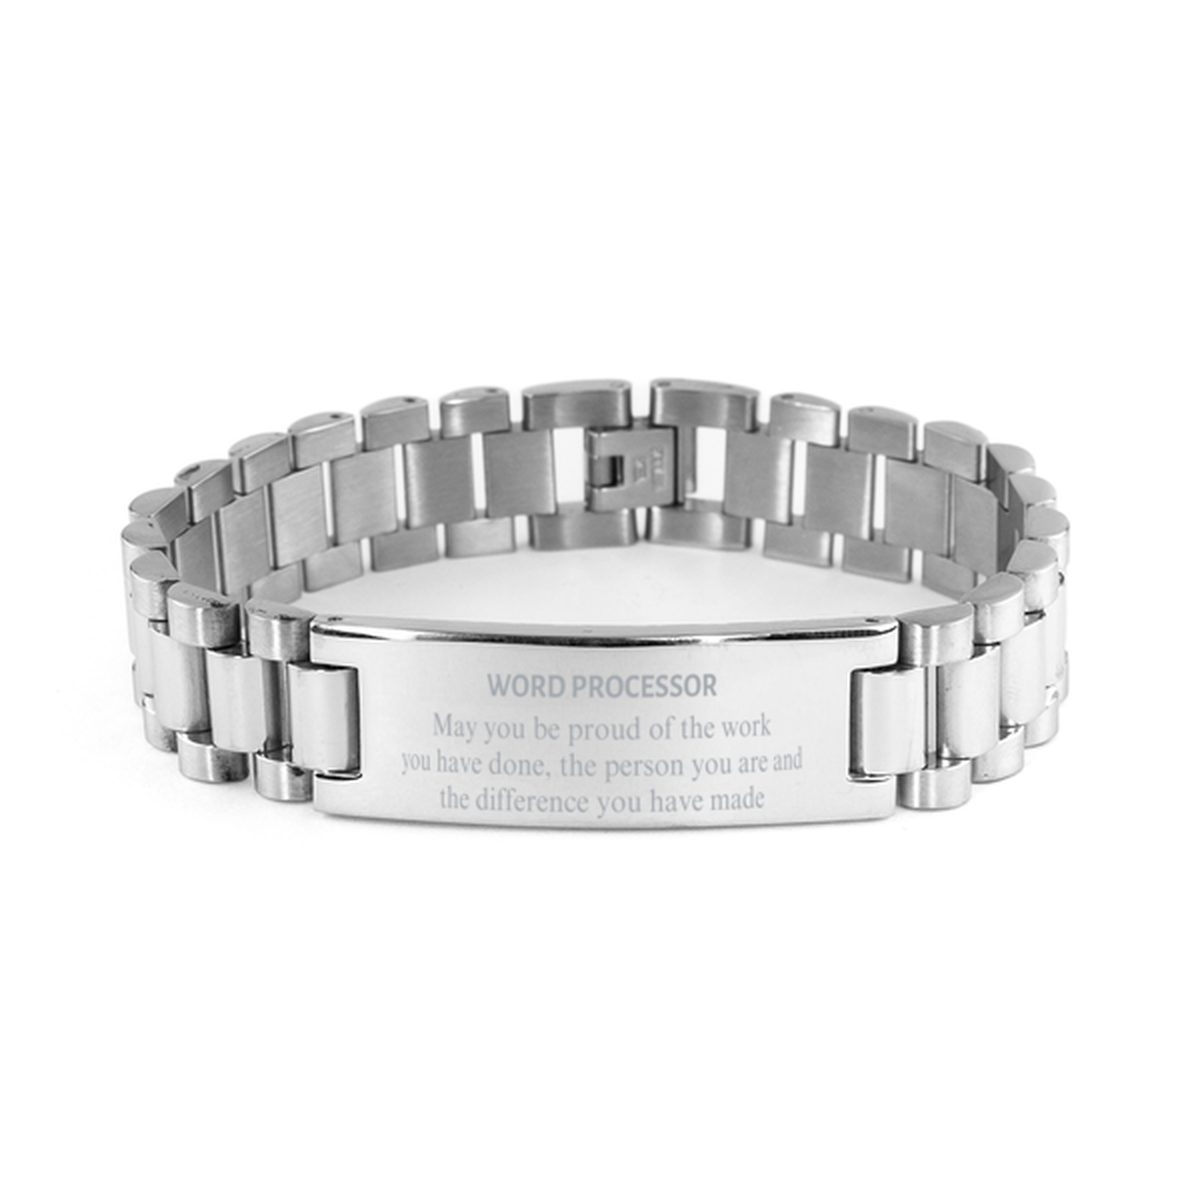 Word Processor May you be proud of the work you have done, Retirement Word Processor Ladder Stainless Steel Bracelet for Colleague Appreciation Gifts Amazing for Word Processor